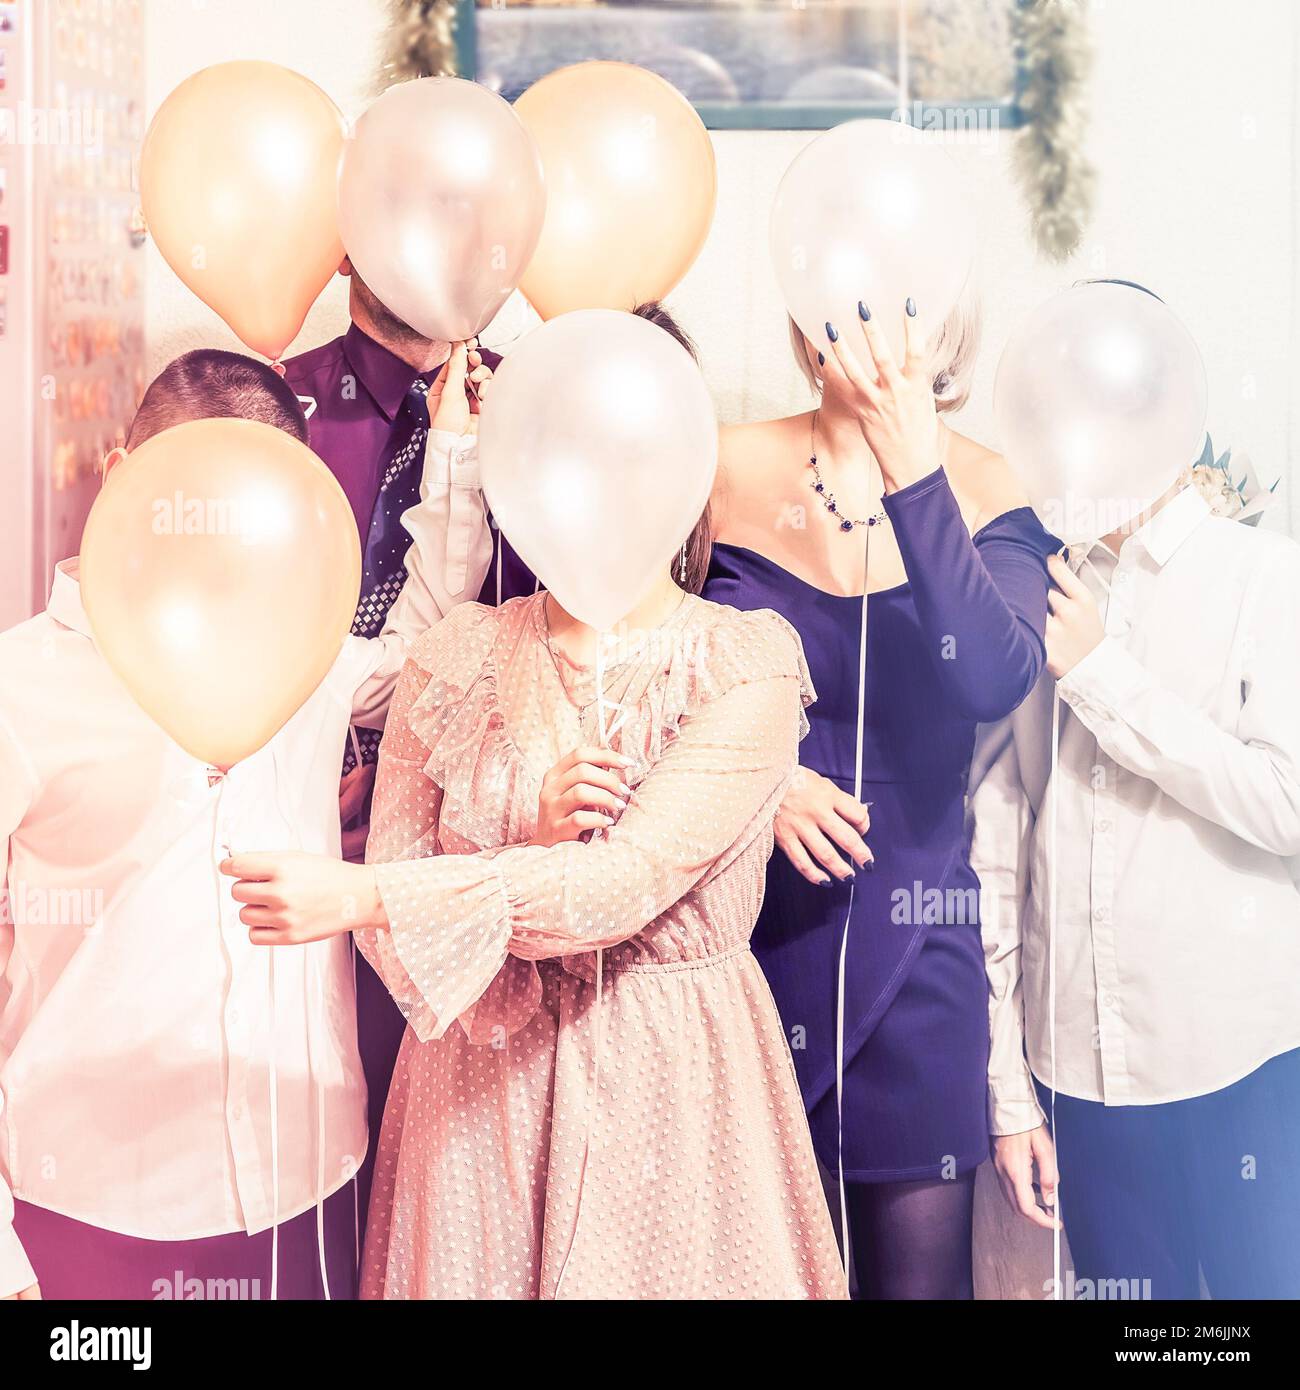 A family hiding their faces behind balloons. Cheerful holiday family photo. Stock Photo